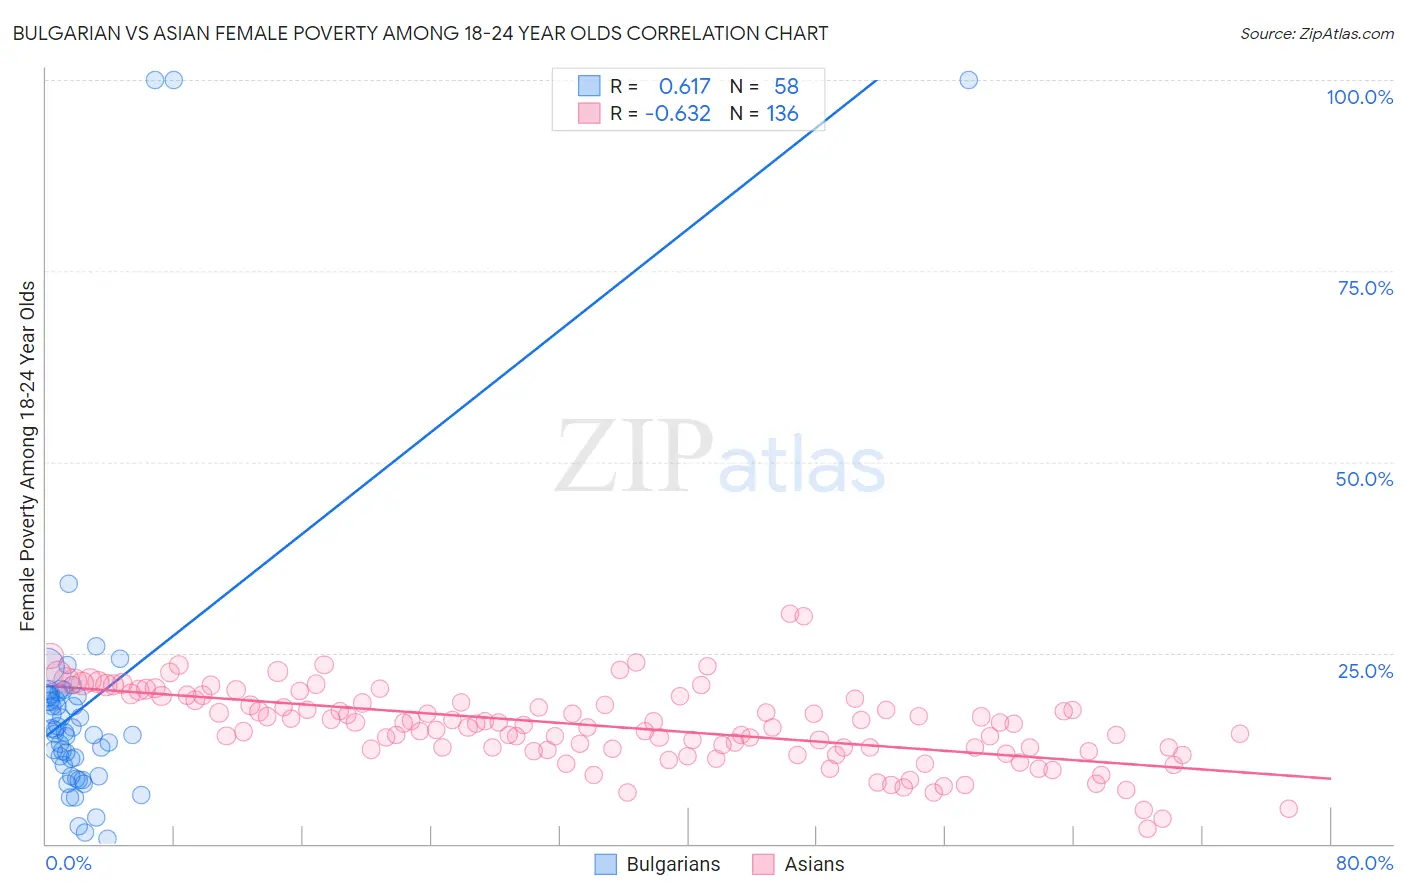 Bulgarian vs Asian Female Poverty Among 18-24 Year Olds